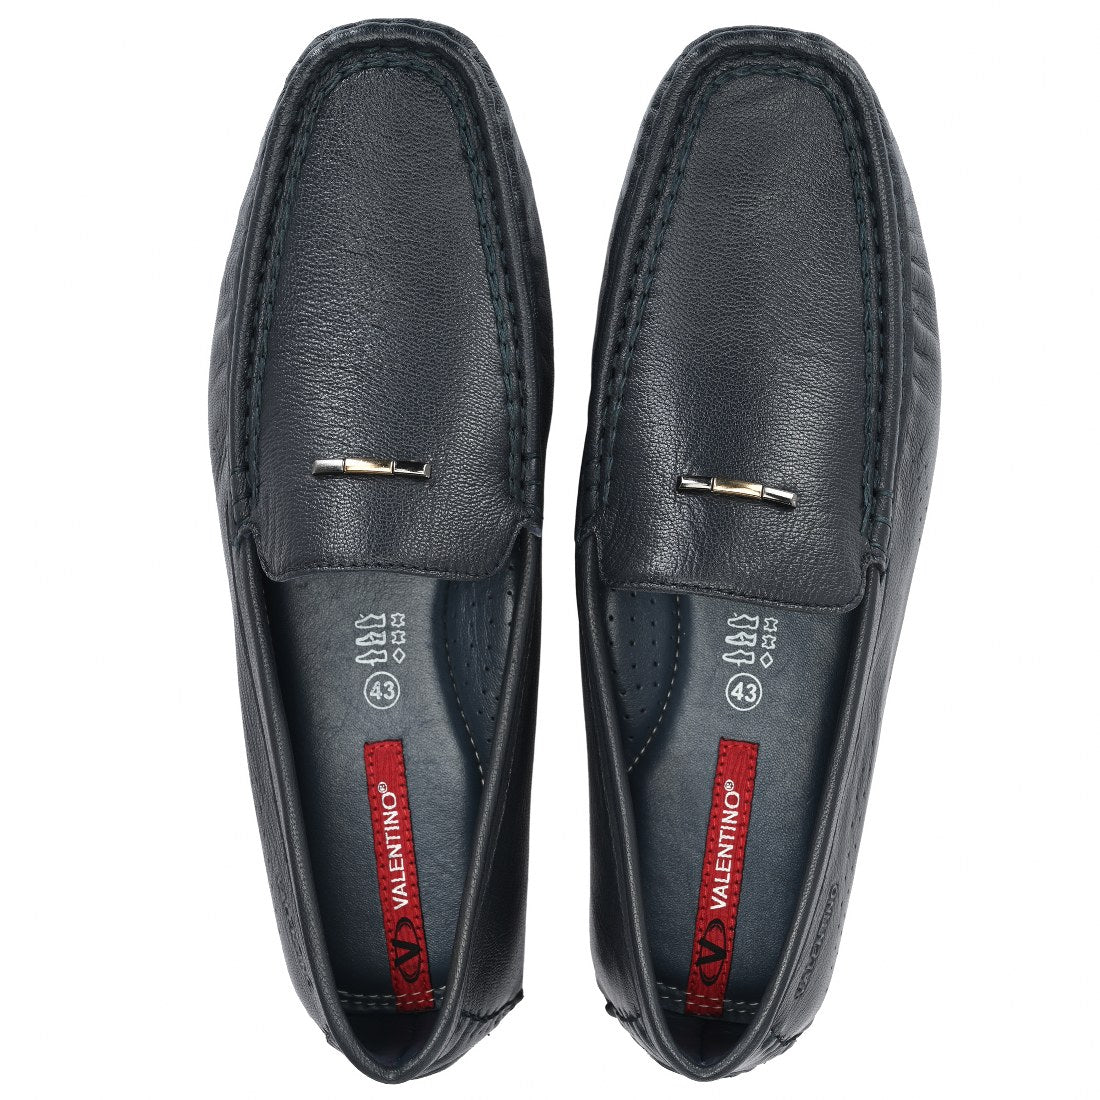 EMPORIO-36 MEN LEATHER BLUE CASUAL SLIP ON DRIVING